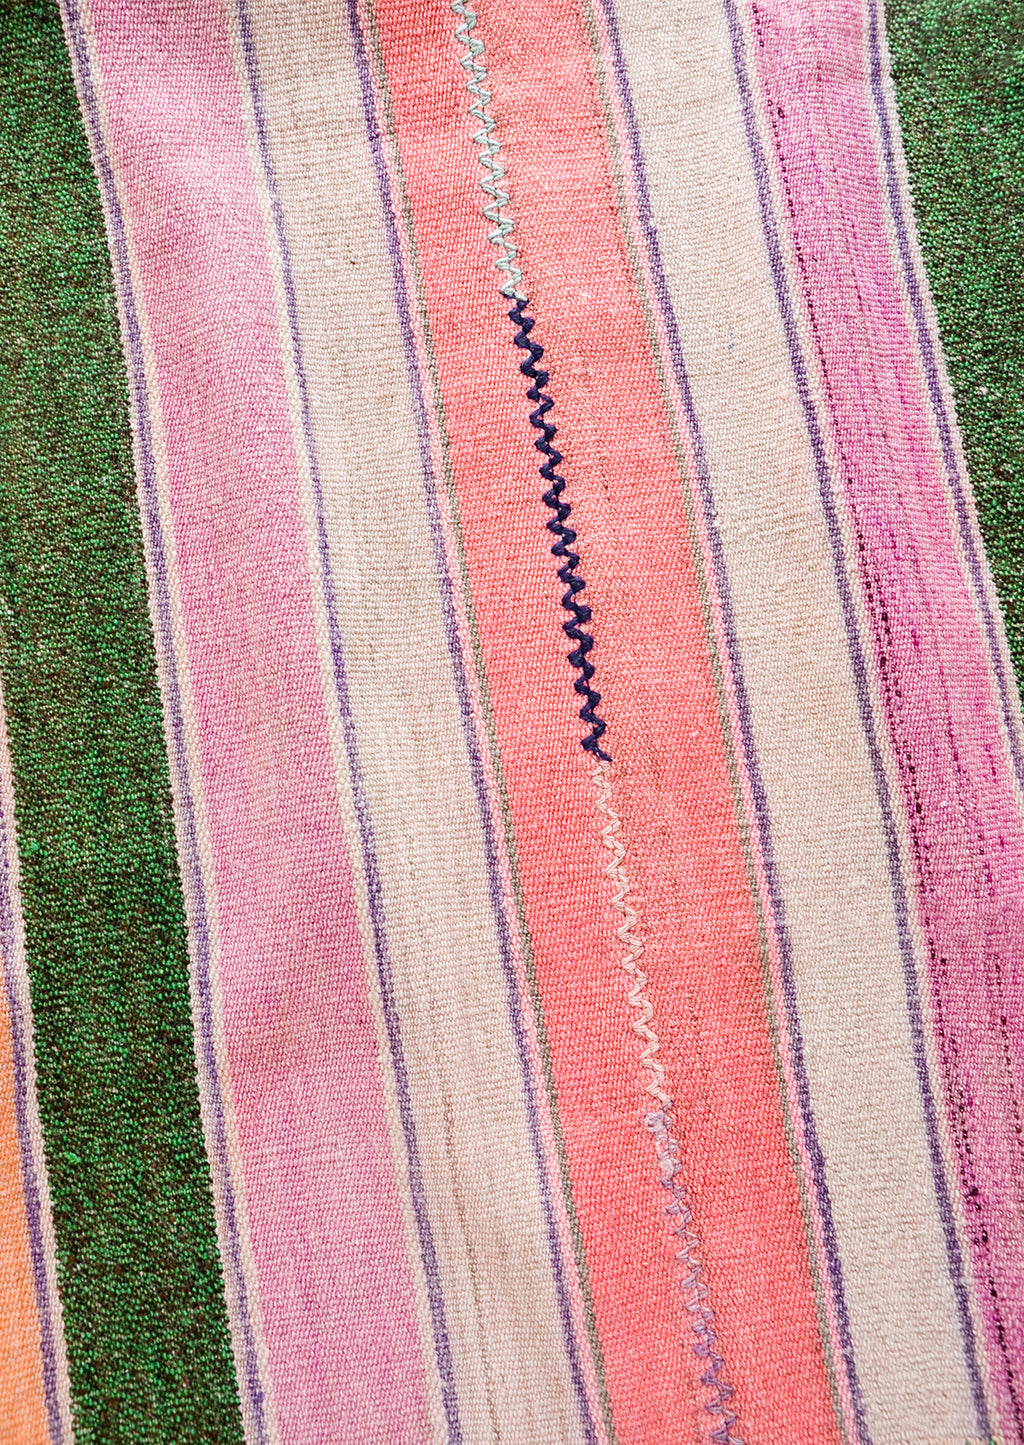 3: Wool textile in multicolor striped pattern with zigzag stitch detail at center